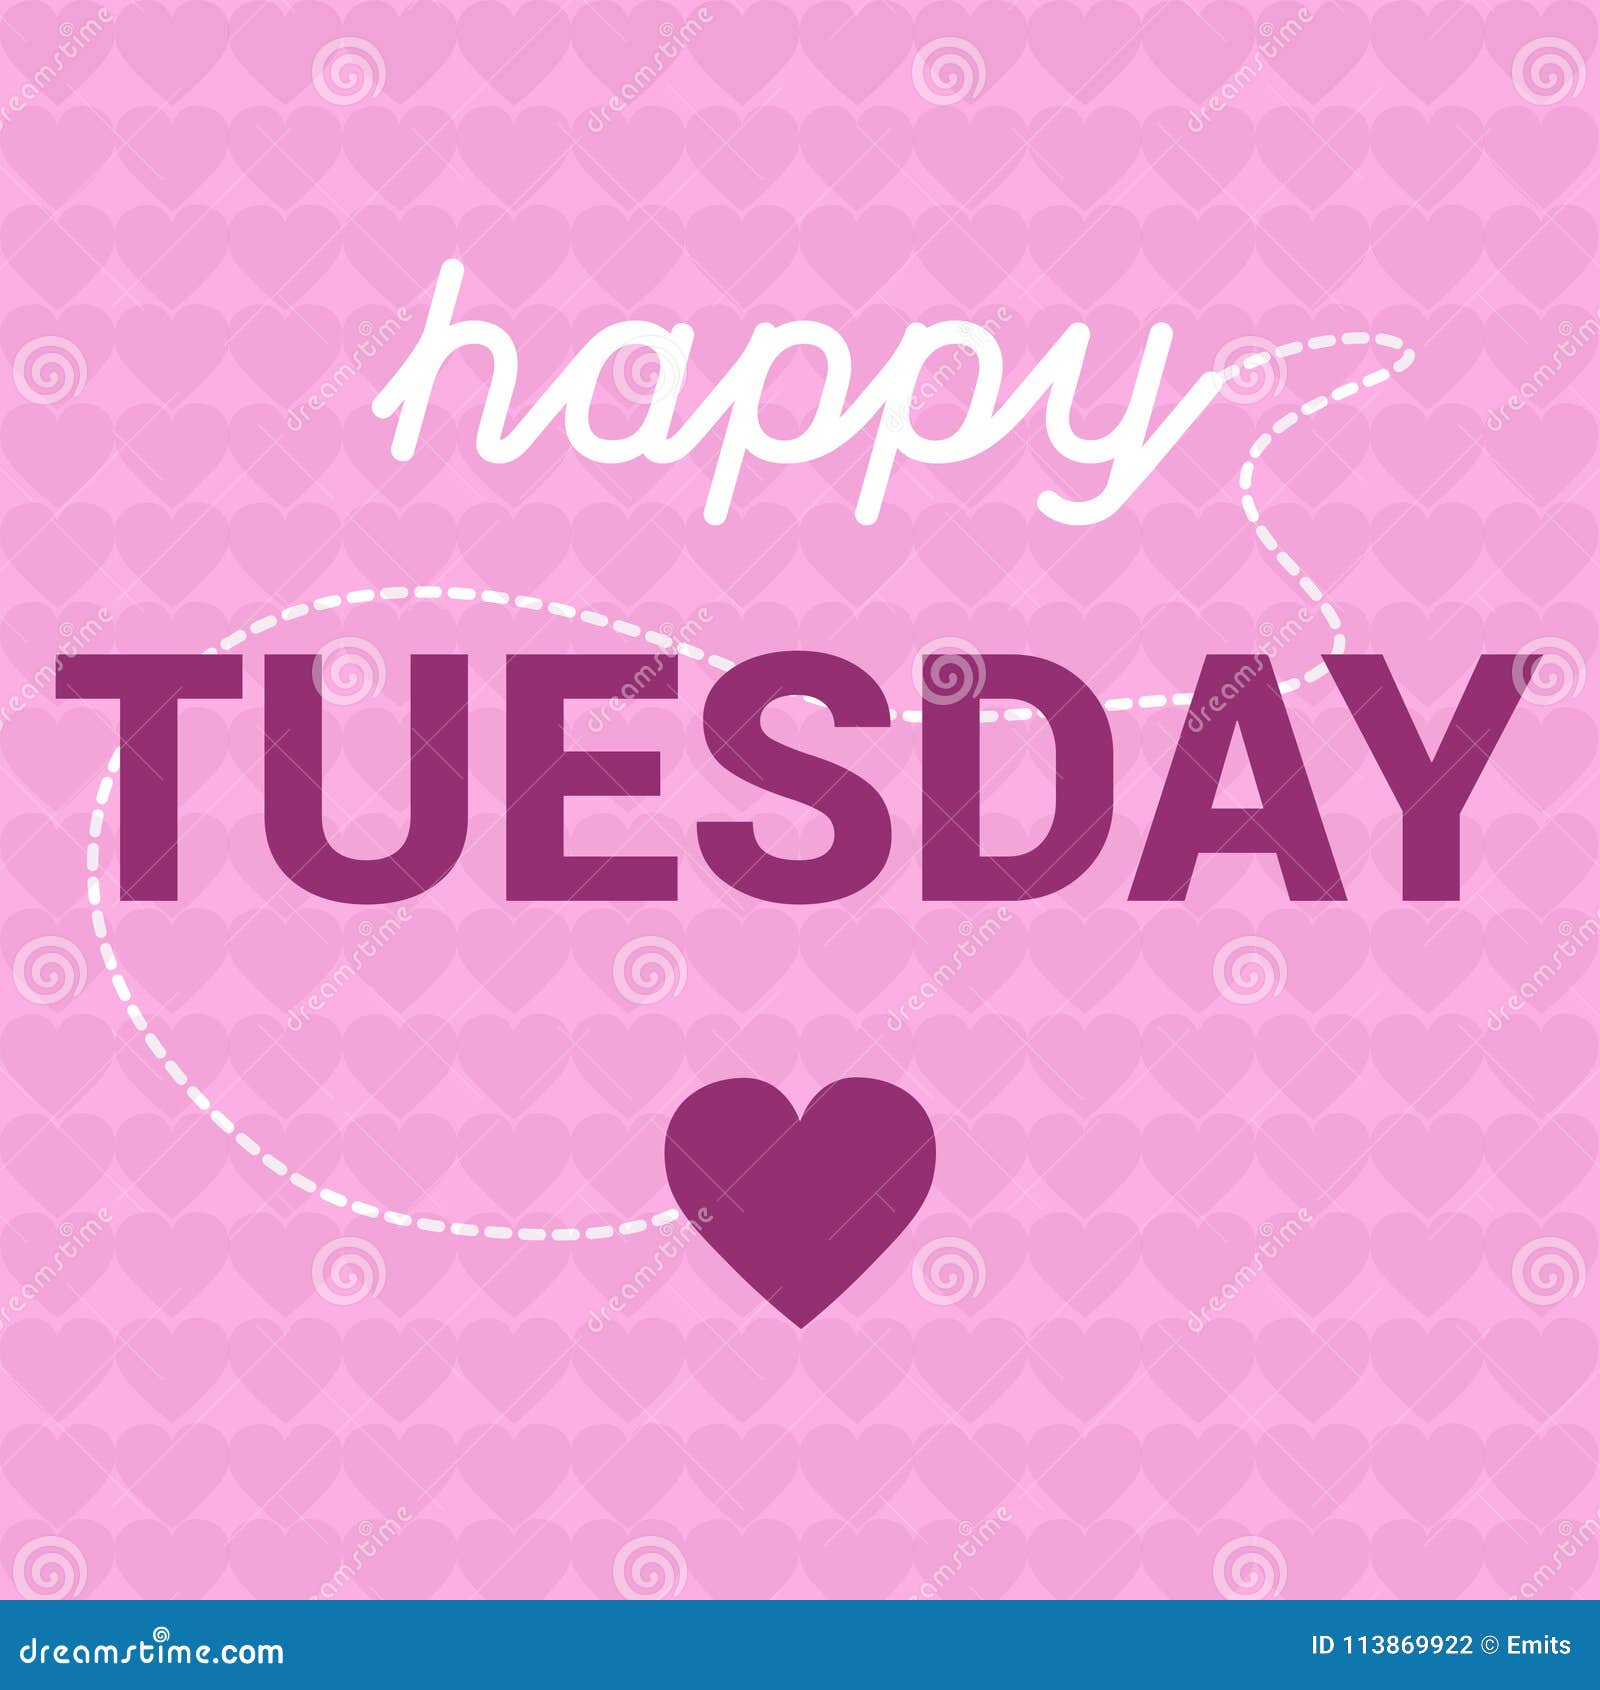 Happy Tuesday Motivation with Hearts Message Concept Stock ...